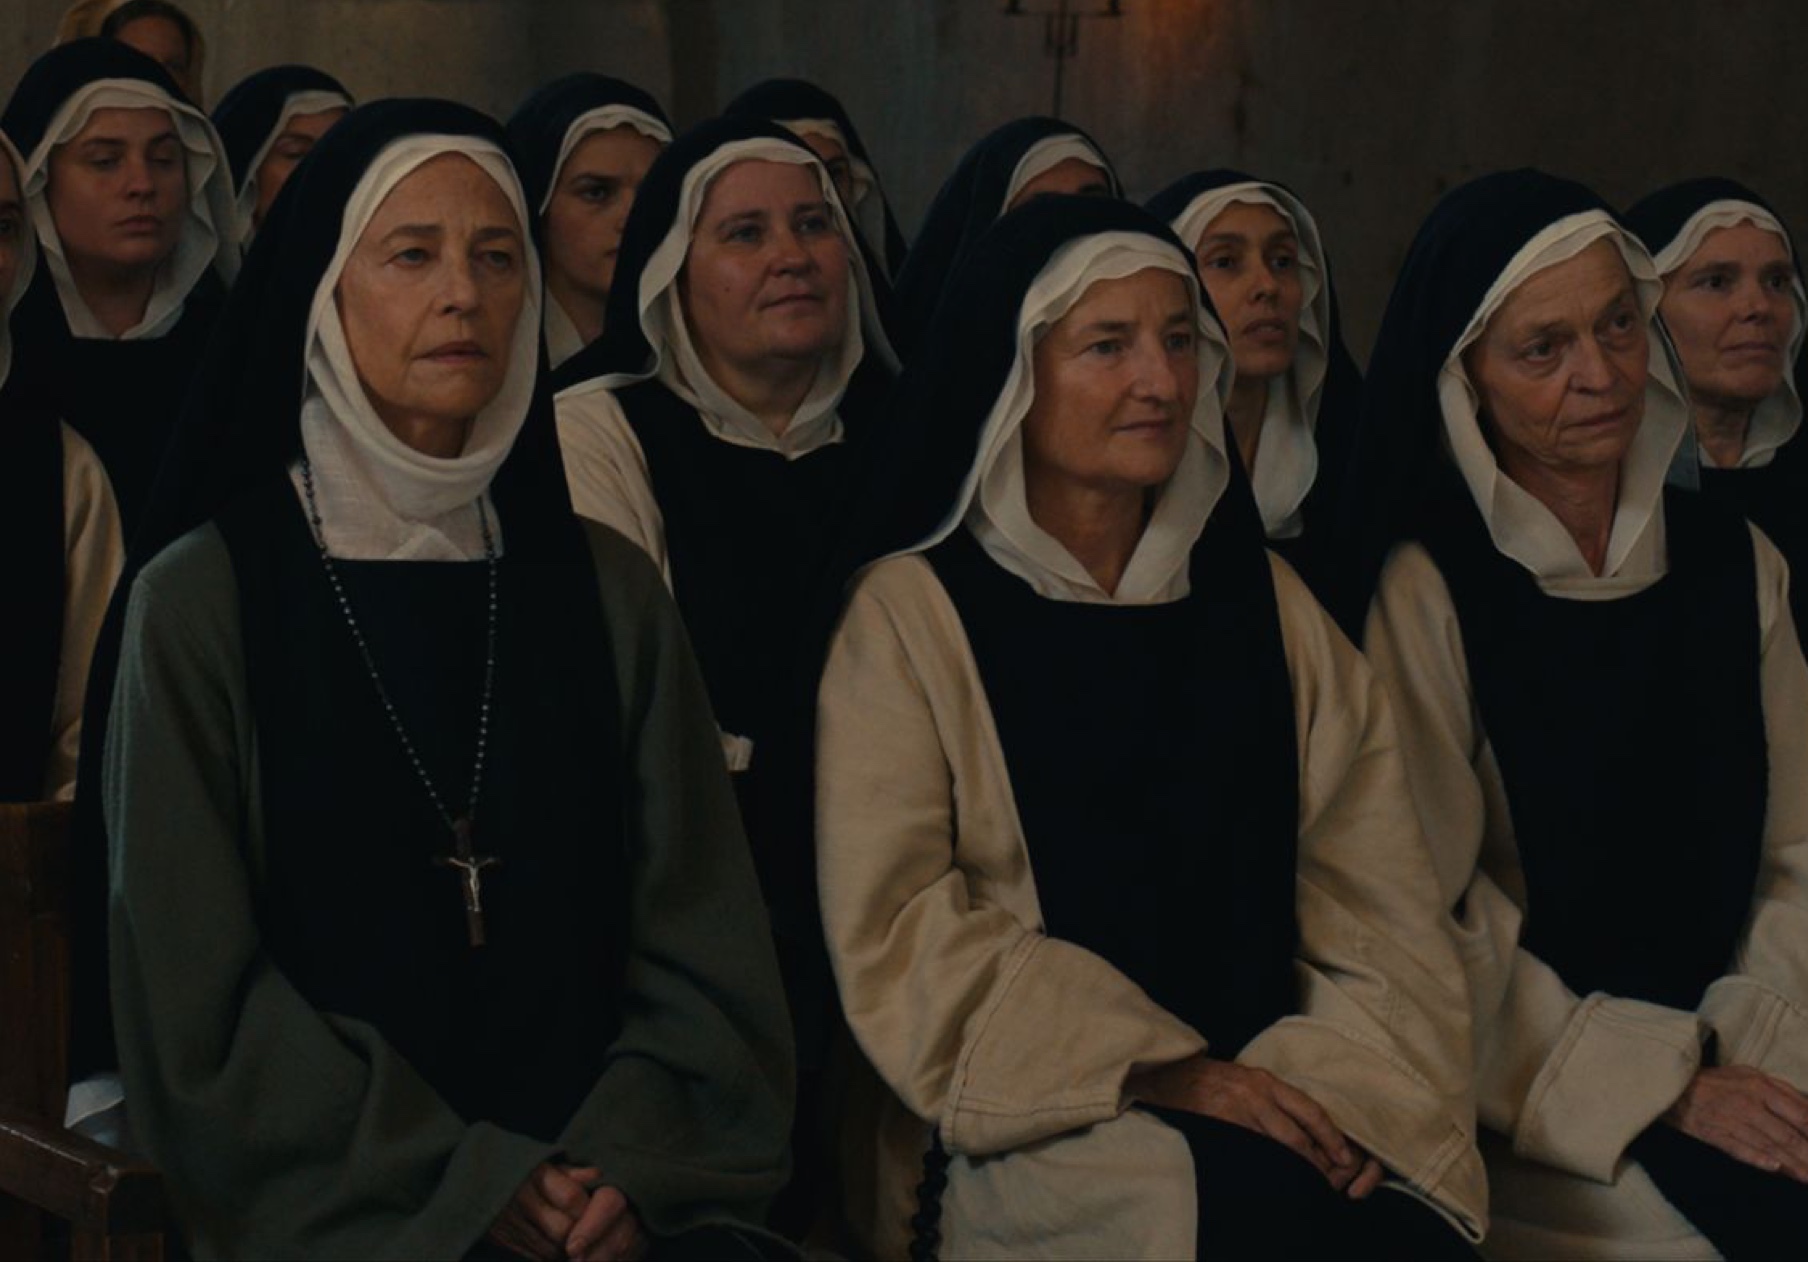 a group of nuns sit together in silence. 